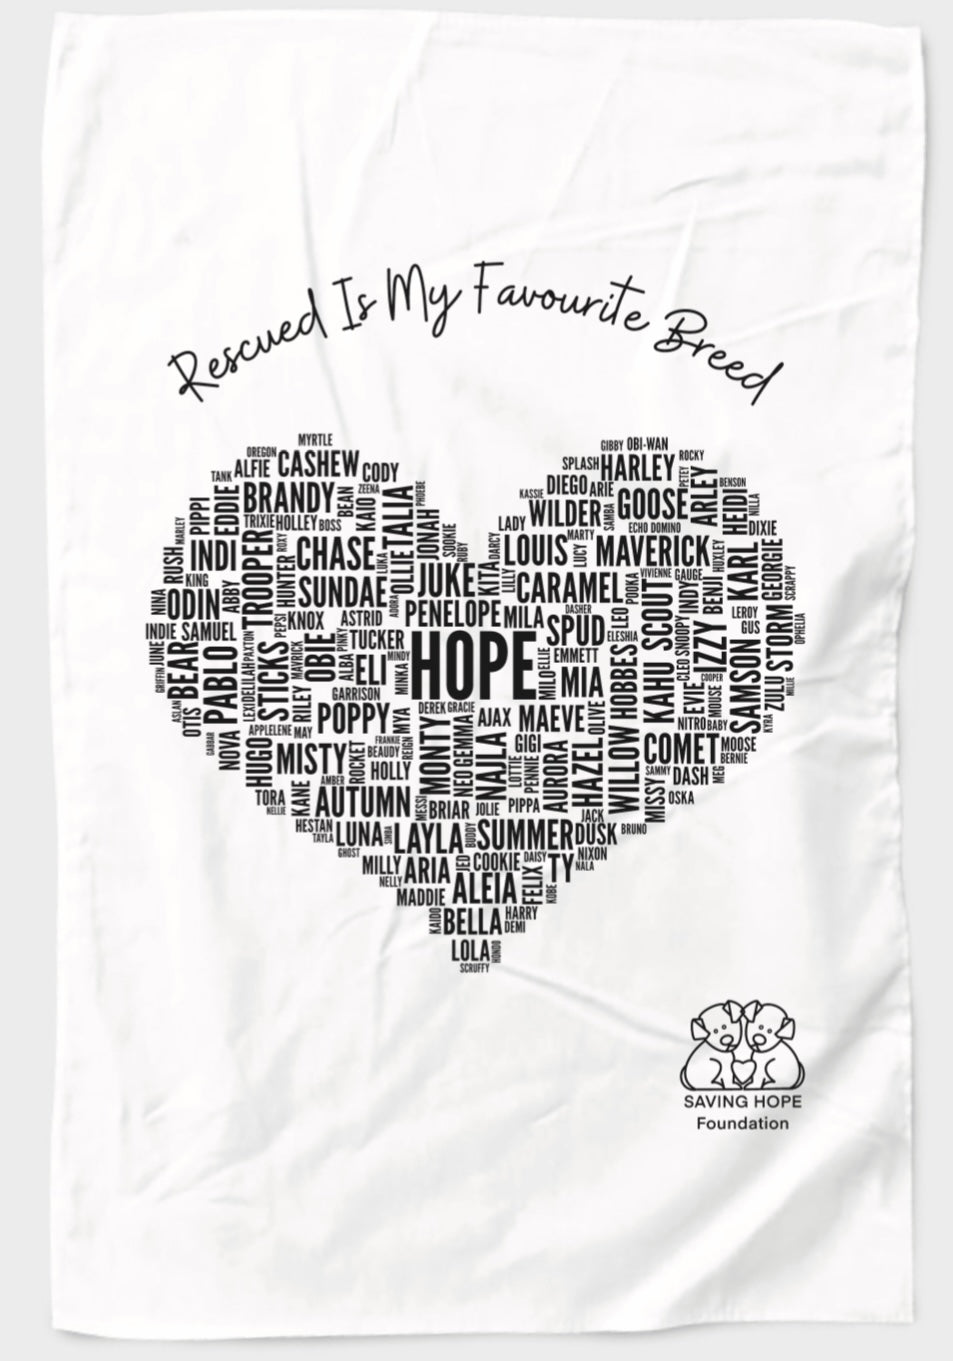 Rescued Is My favourite Breed Tea Towel